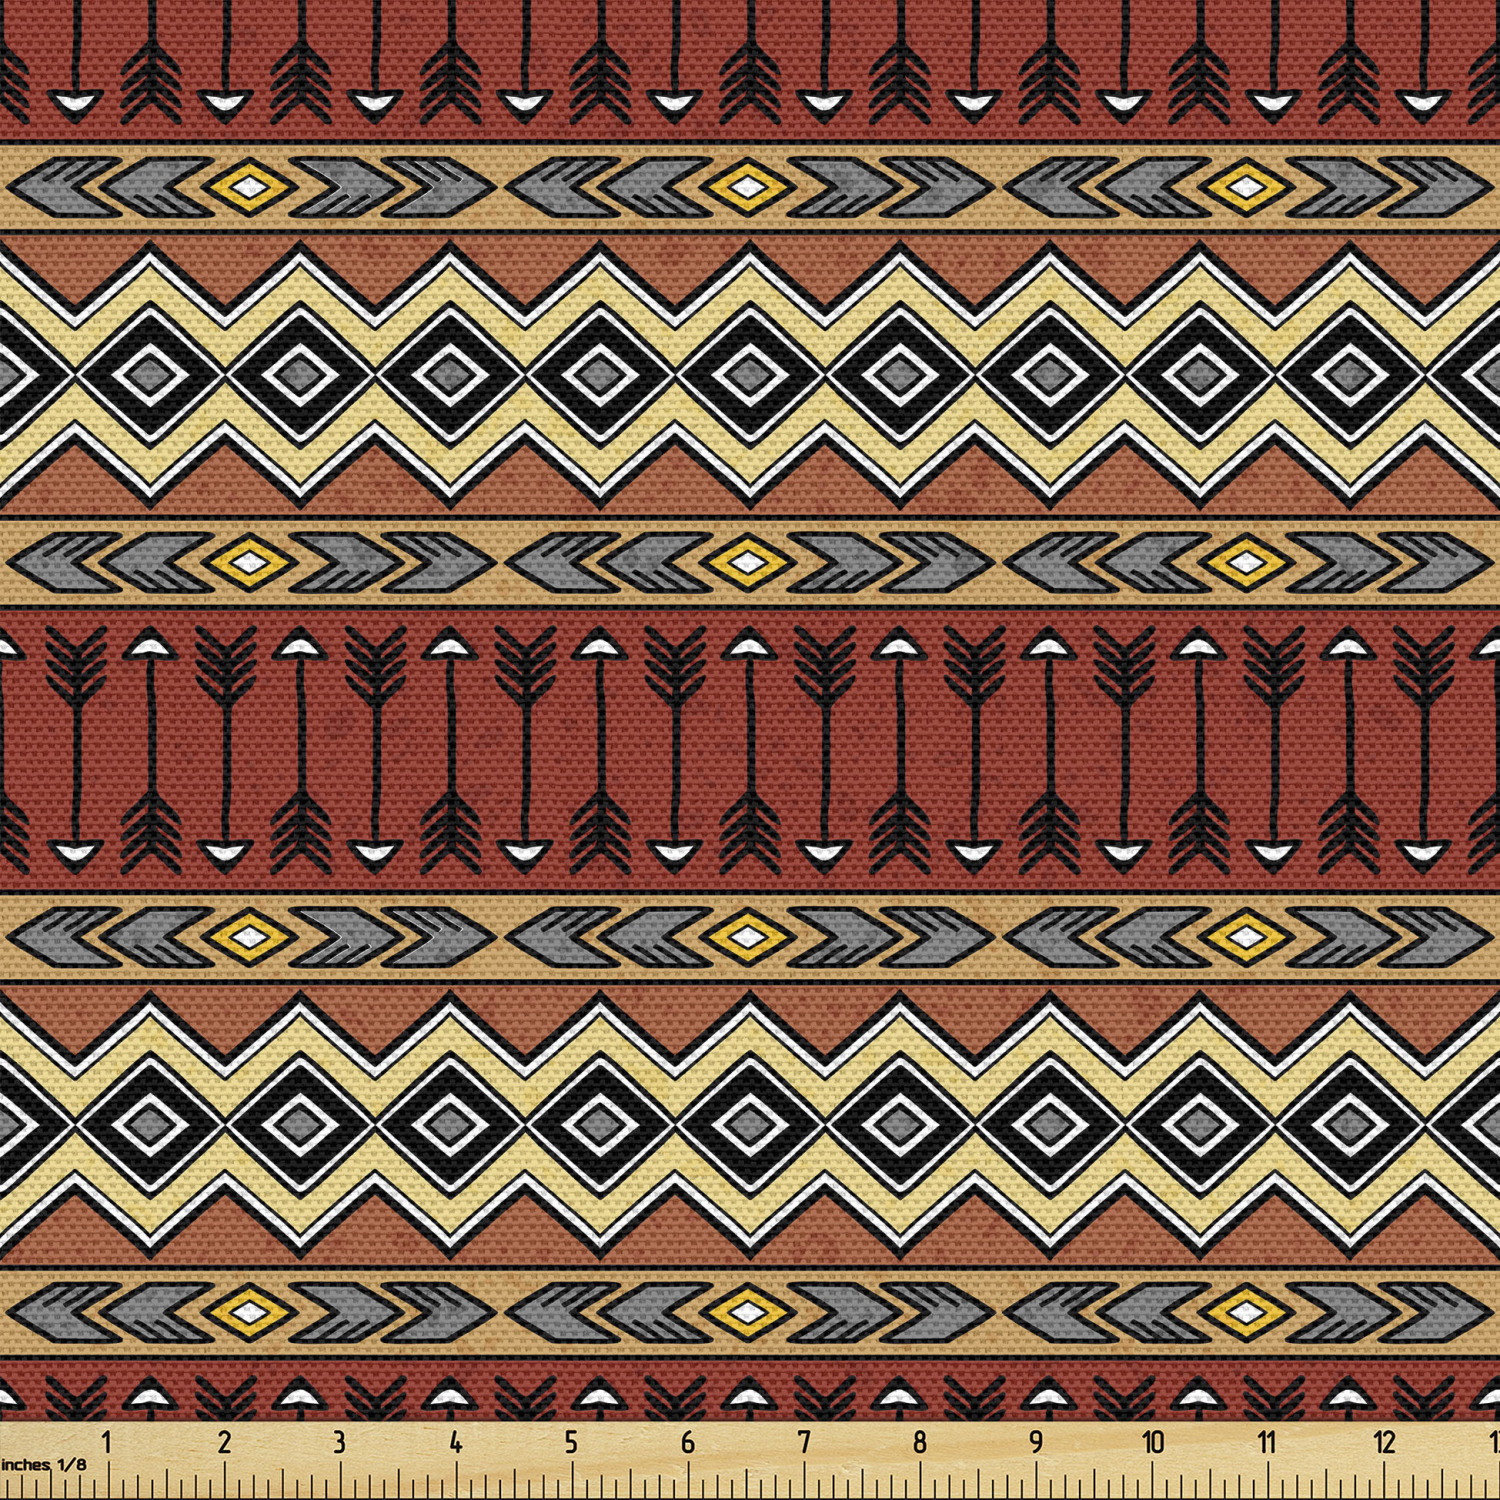 Boho Fabric by the Yard, Horizontal Native Borders with and Geometric  Motifs in Hand Drawn Style, Decorative Upholstery Fabric for Sofas and Home  Accents, Multicolor by Ambesonne 